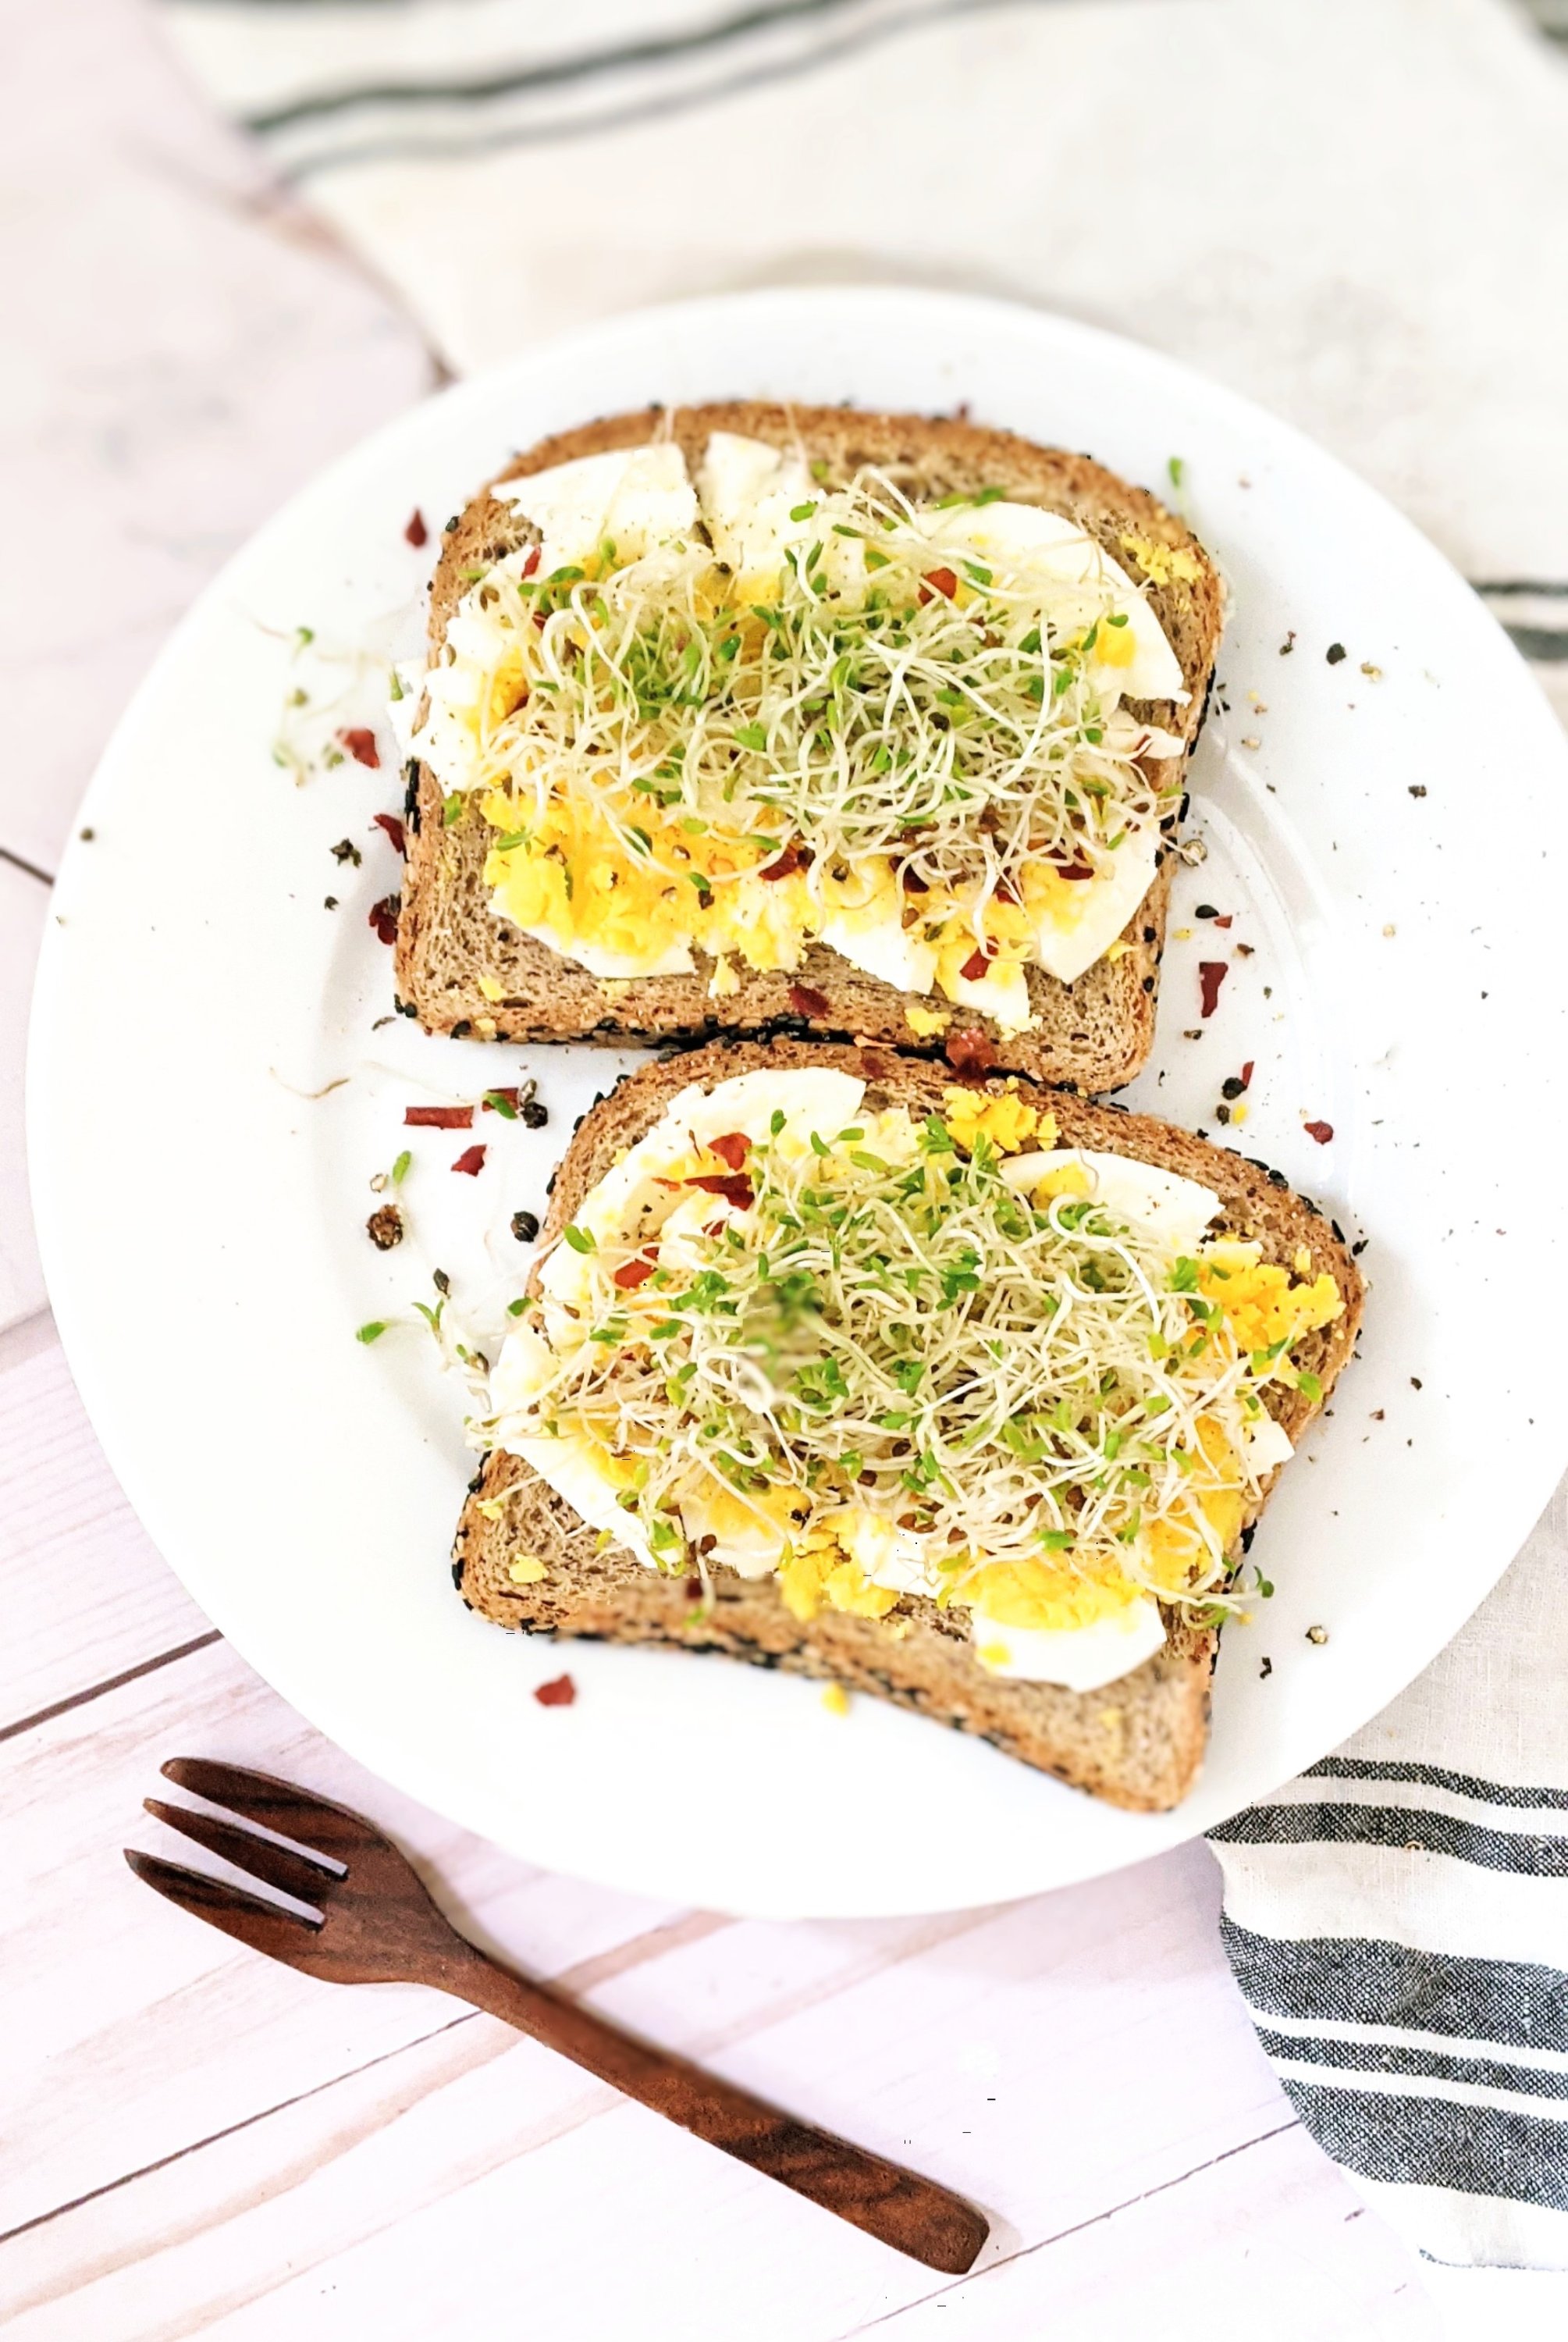 keto hardboiled egg sandwich recipe easy low carb hardboiled egg recipes best keto sandwiches for breakfast or lunch low carb breakfast ideas with eggs and sprouts do alfalfa sprouts have carbs